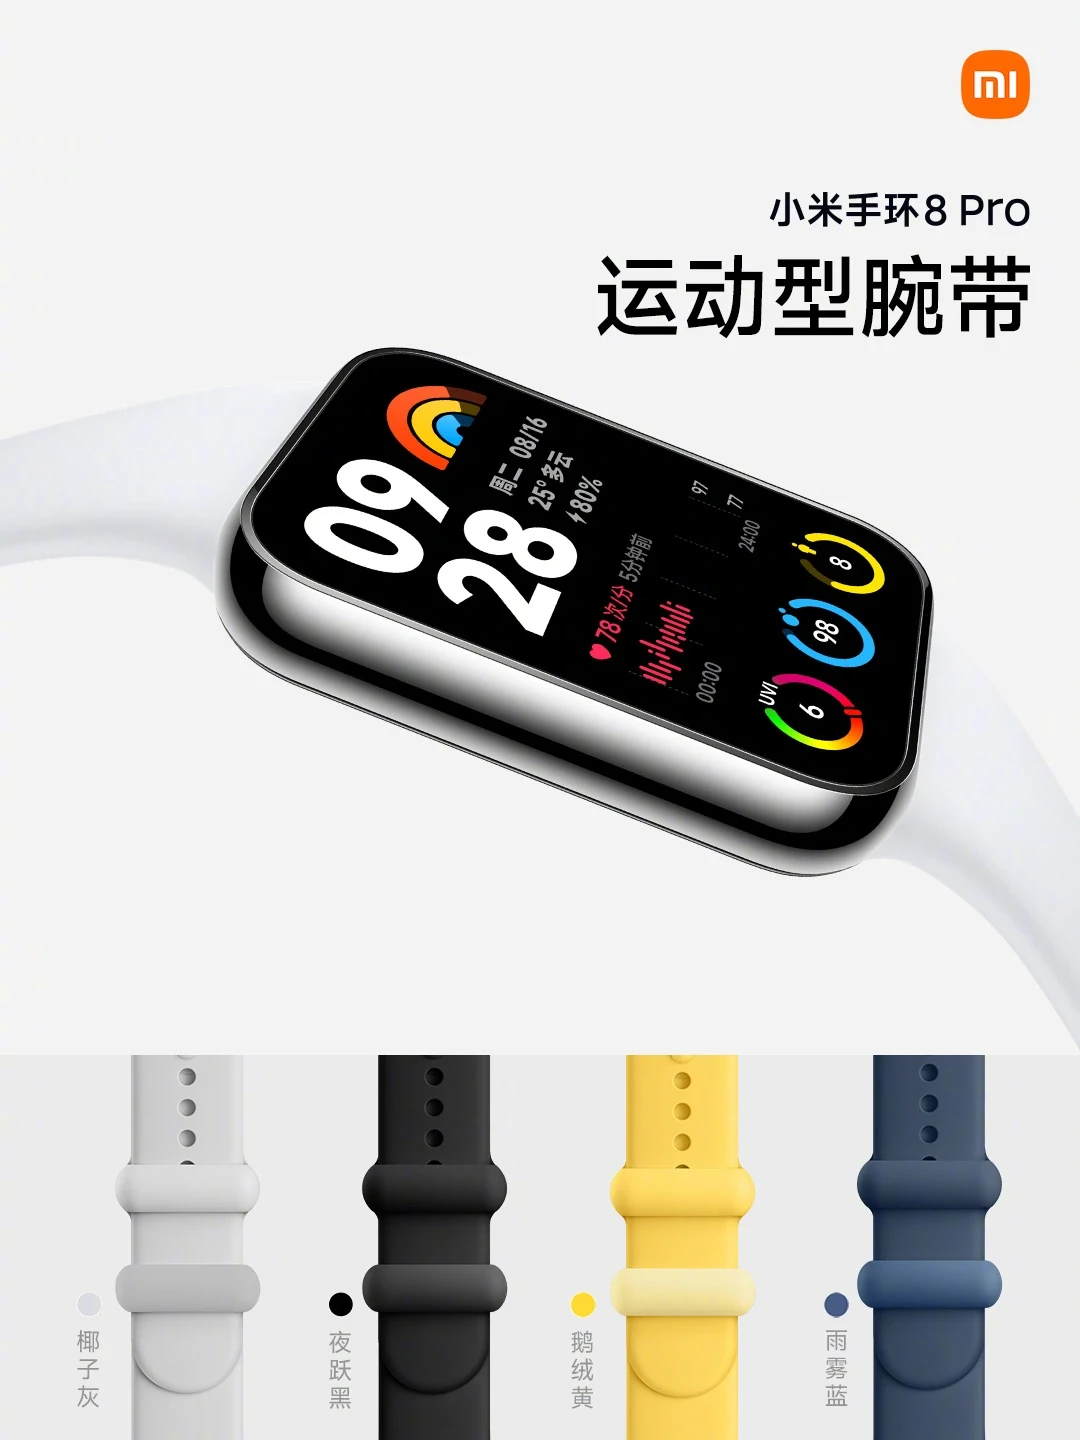 Xiaomi has unveiled Smart Band 8 Pro with large AMOLED display, GPS, NFC,  5ATM water protection and support for 150+ sport modes at a price of $55